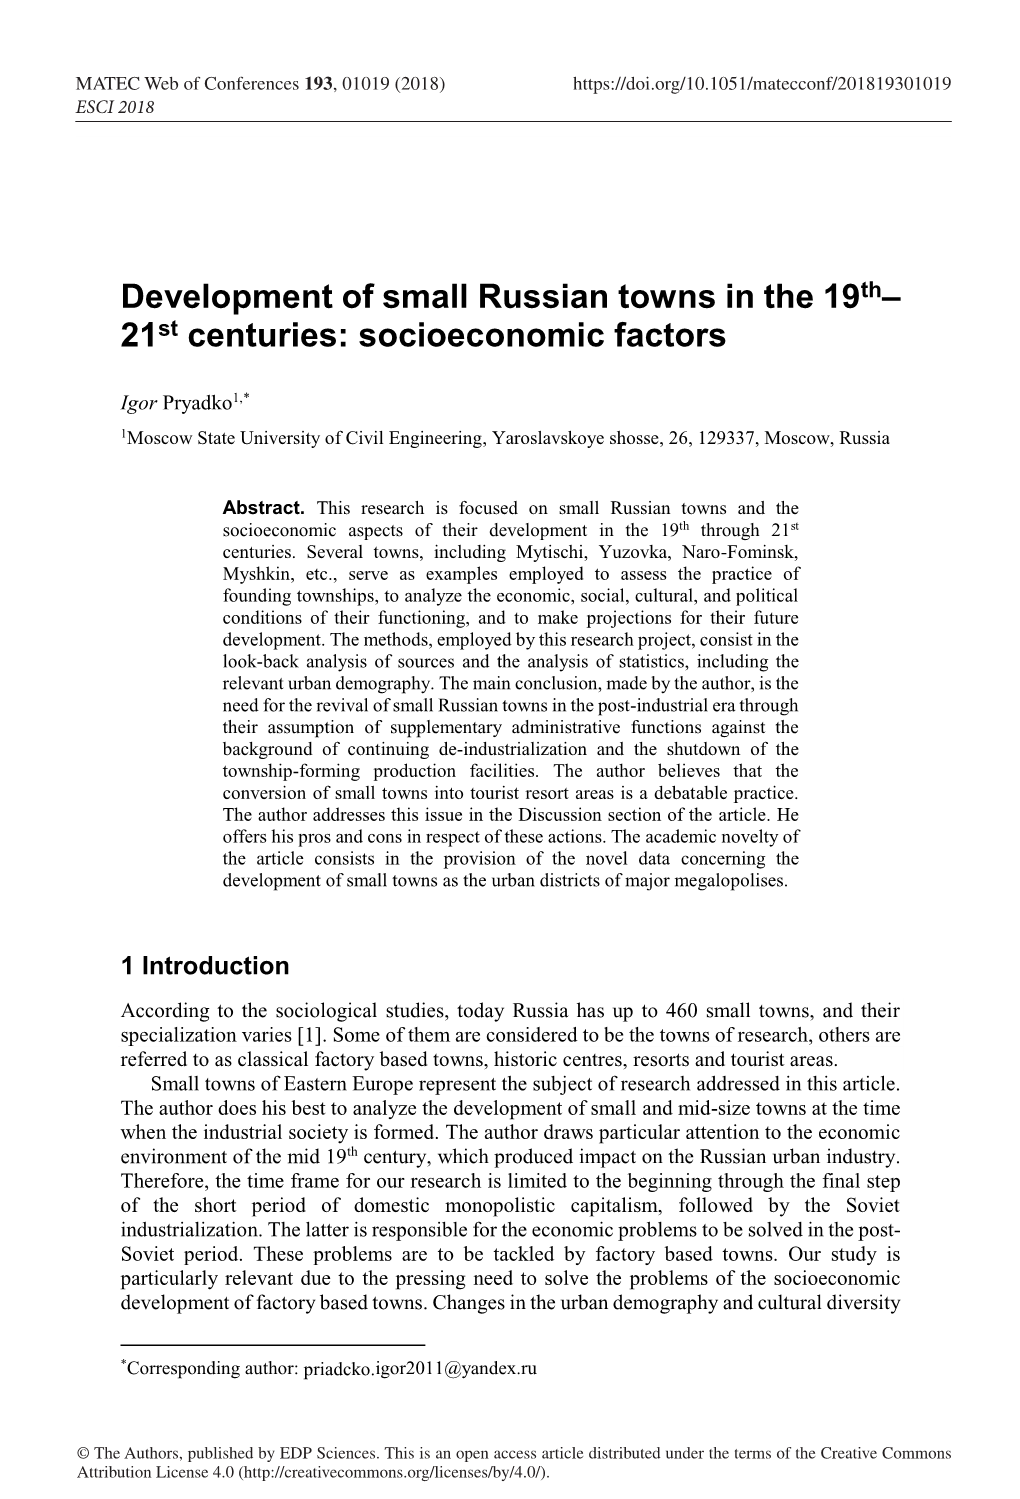 Development of Small Russian Towns in the 19Th– 21St Centuries: Socioeconomic Factors